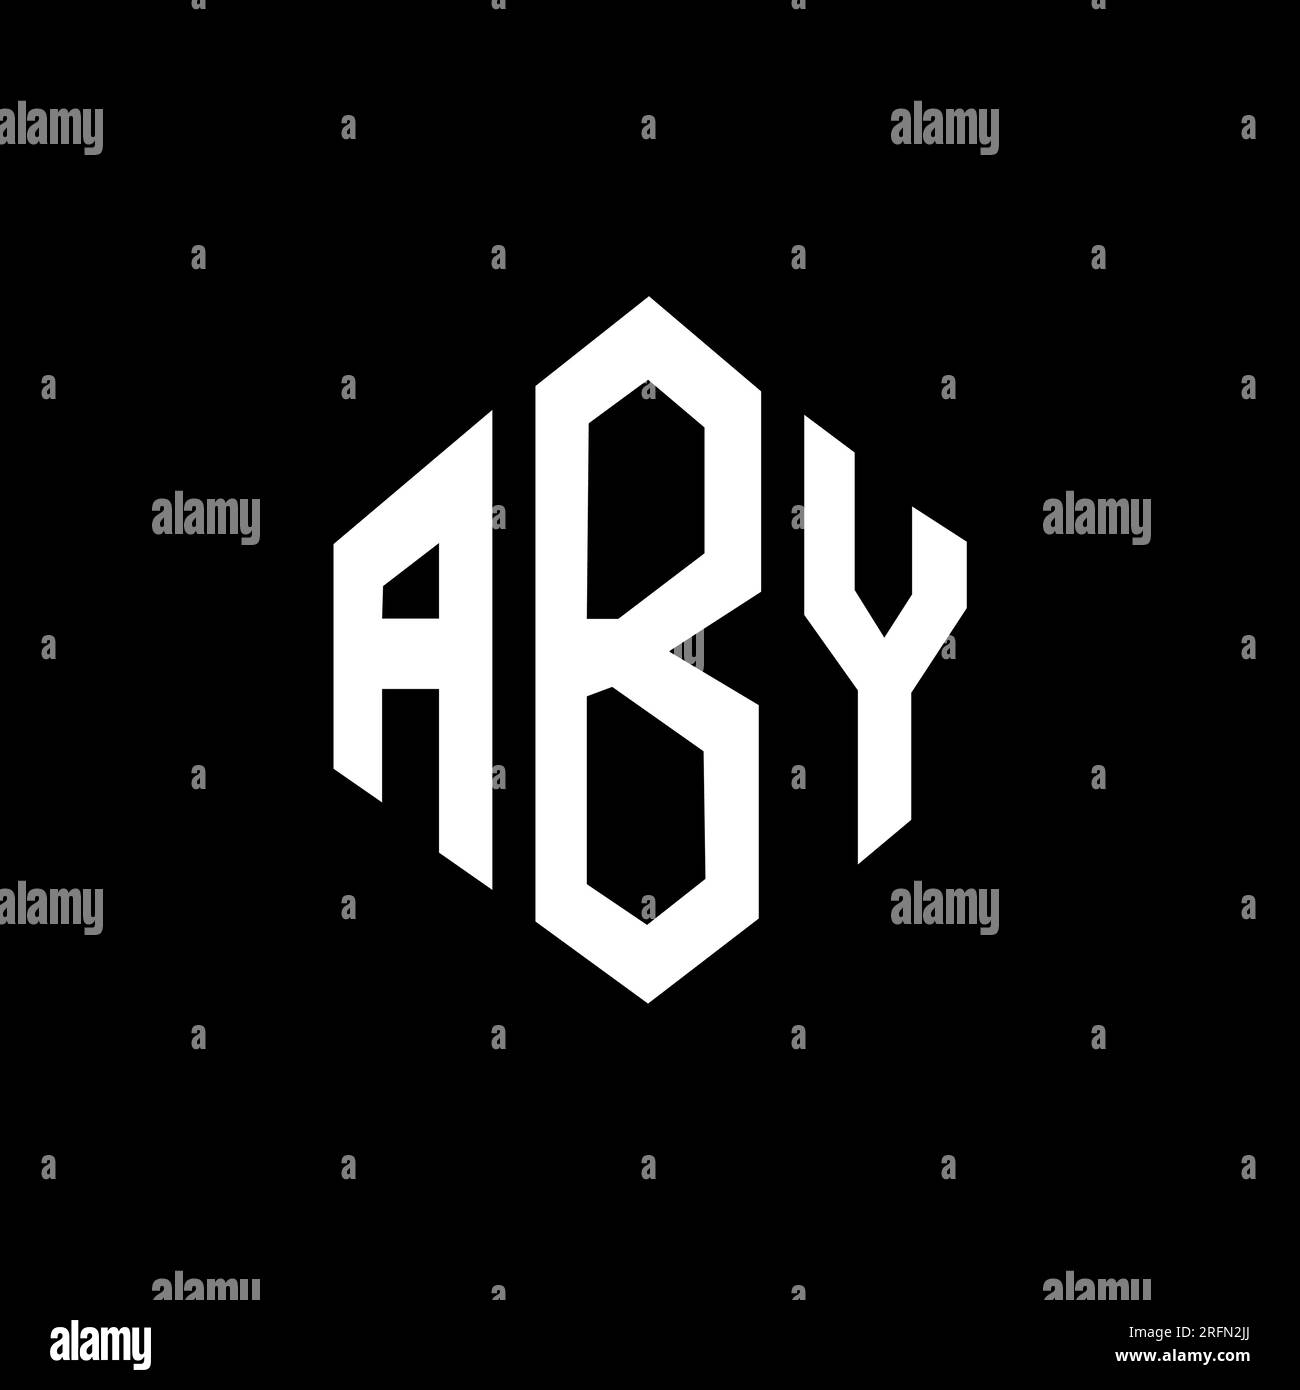 Aby technology logo Black and White Stock Photos & Images - Alamy